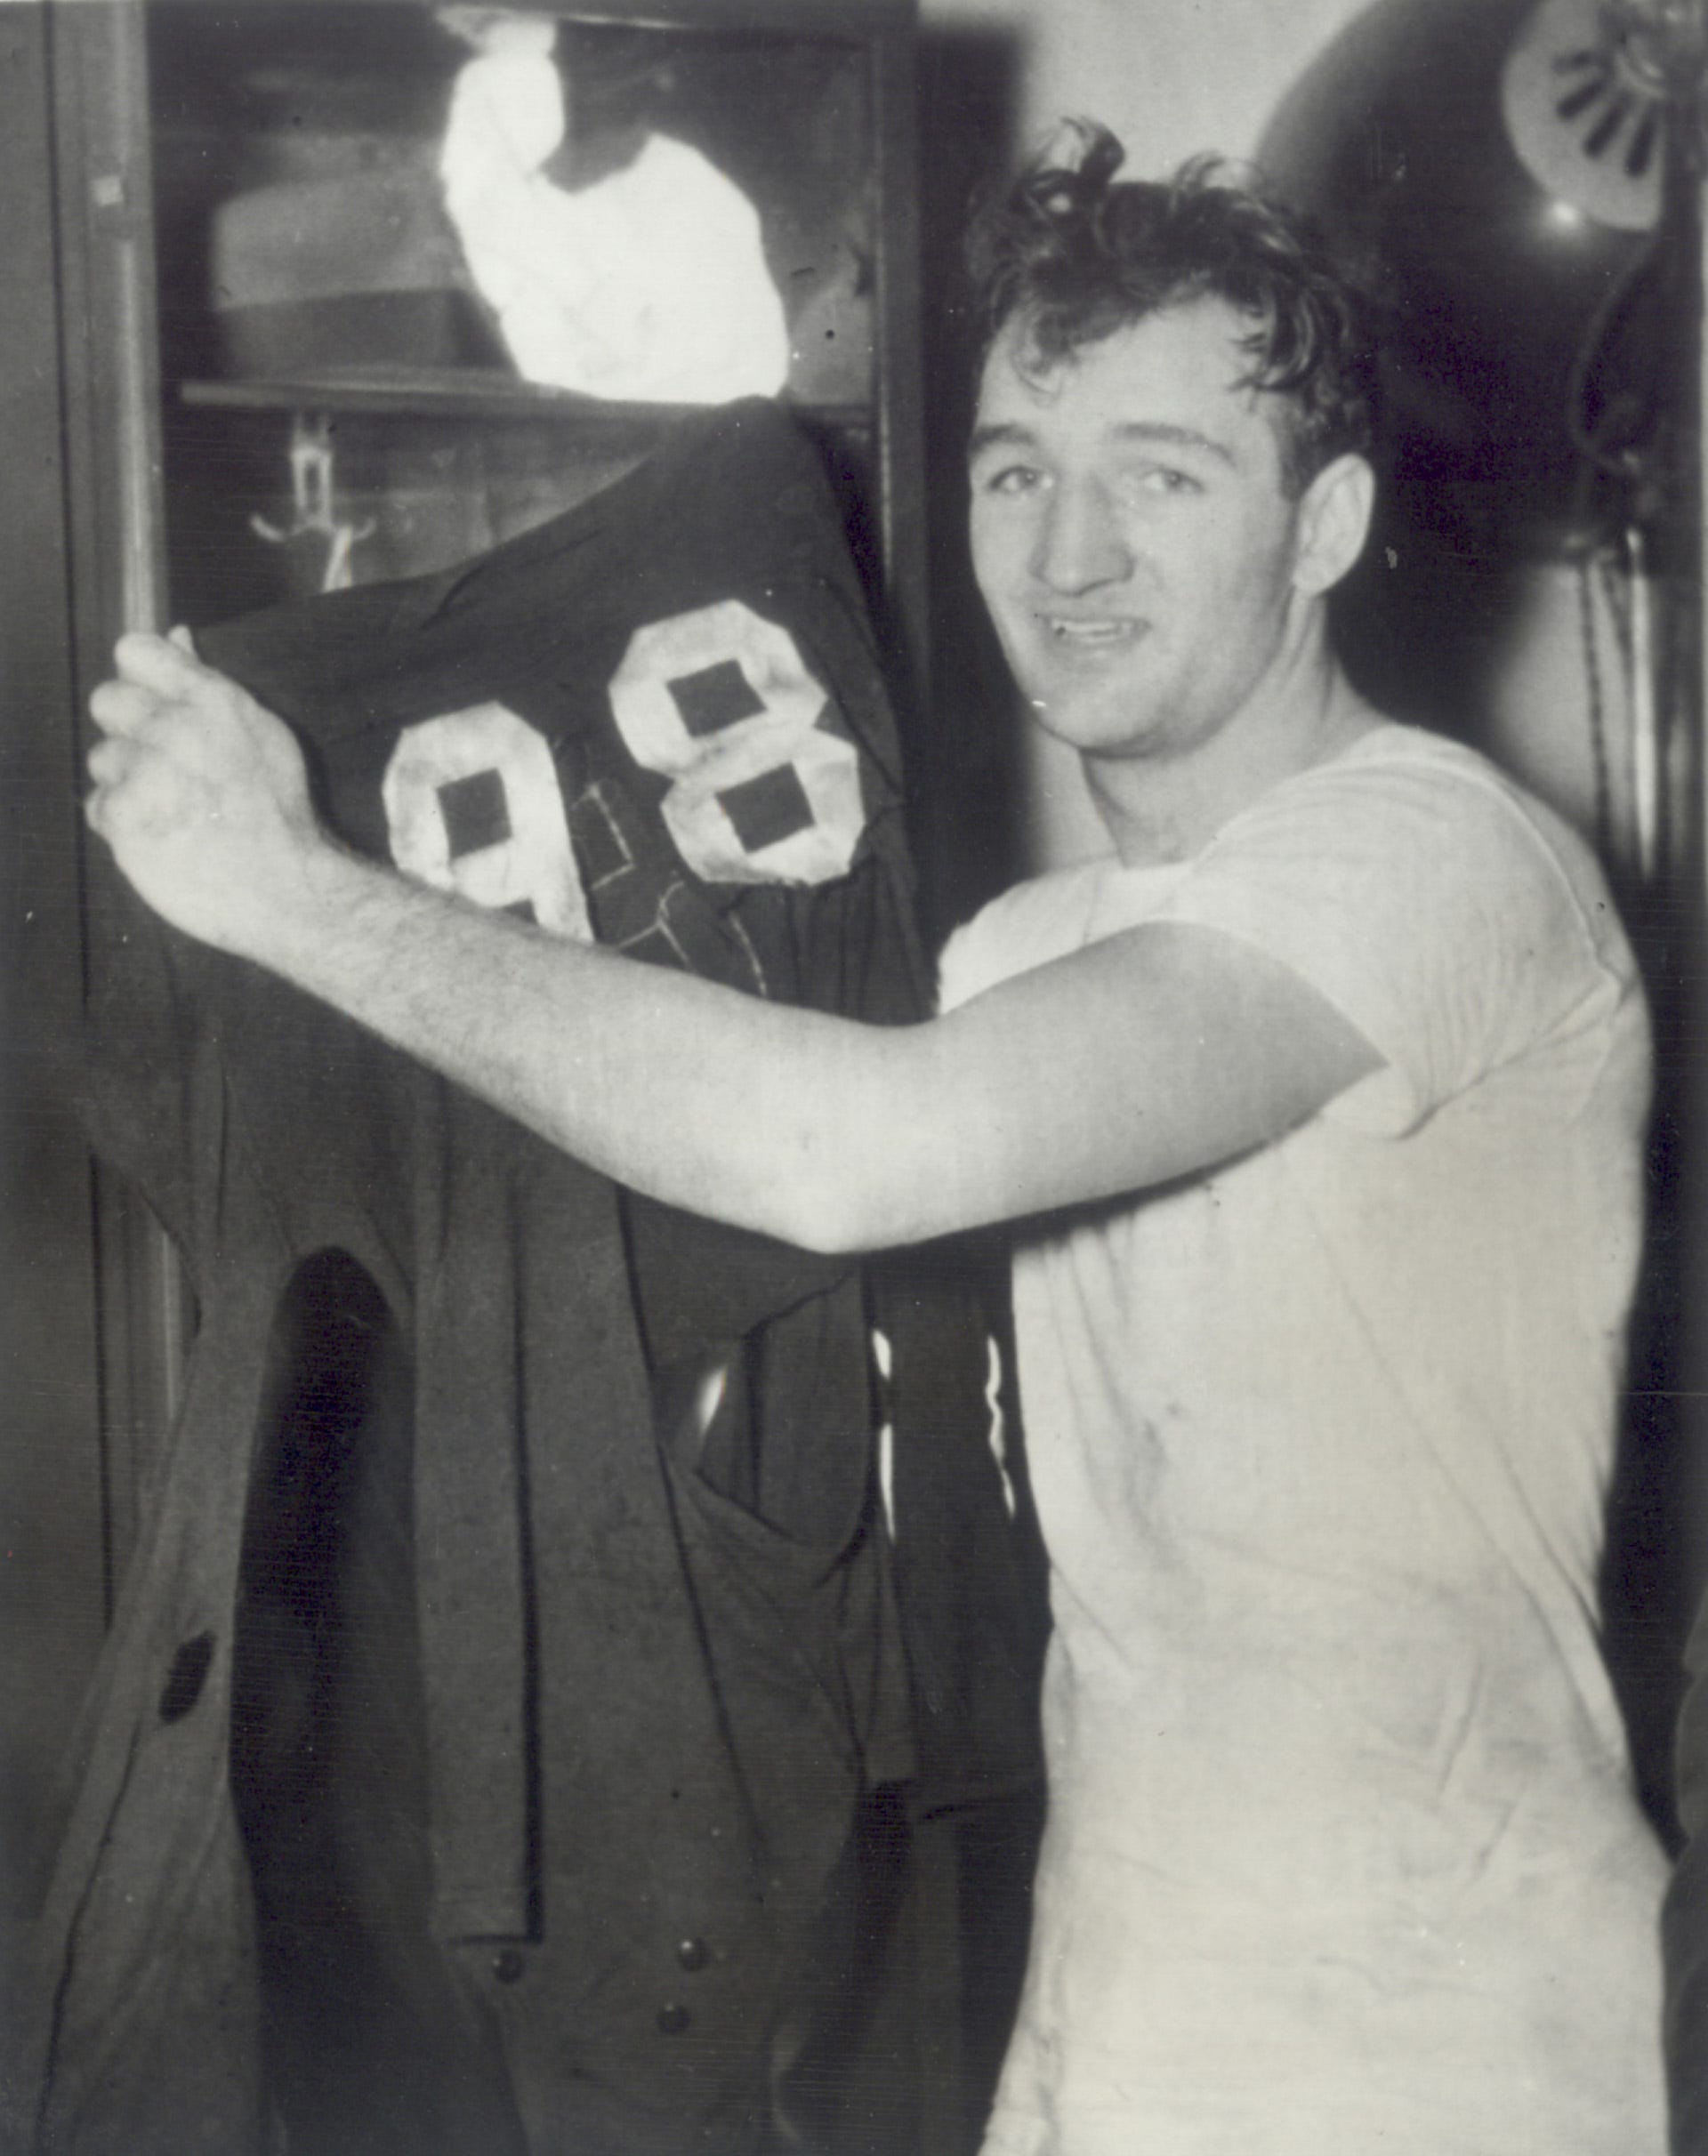 COLUMBUS, OHIO--Tom Harmon hands up his No. 98 jersey after scoring three touchdowns in Michigan's smashing, 40-0, victory over Ohio State at Columbus.  Harmon boosted his three-year touchdown total to 33, surpassing the 15-year-old mark of Illinois' immortal Red Grange, who tallied 31.  The tattered jersey typifies Harmon's smashing play, which often caused him to have two jerseys town off during a game.